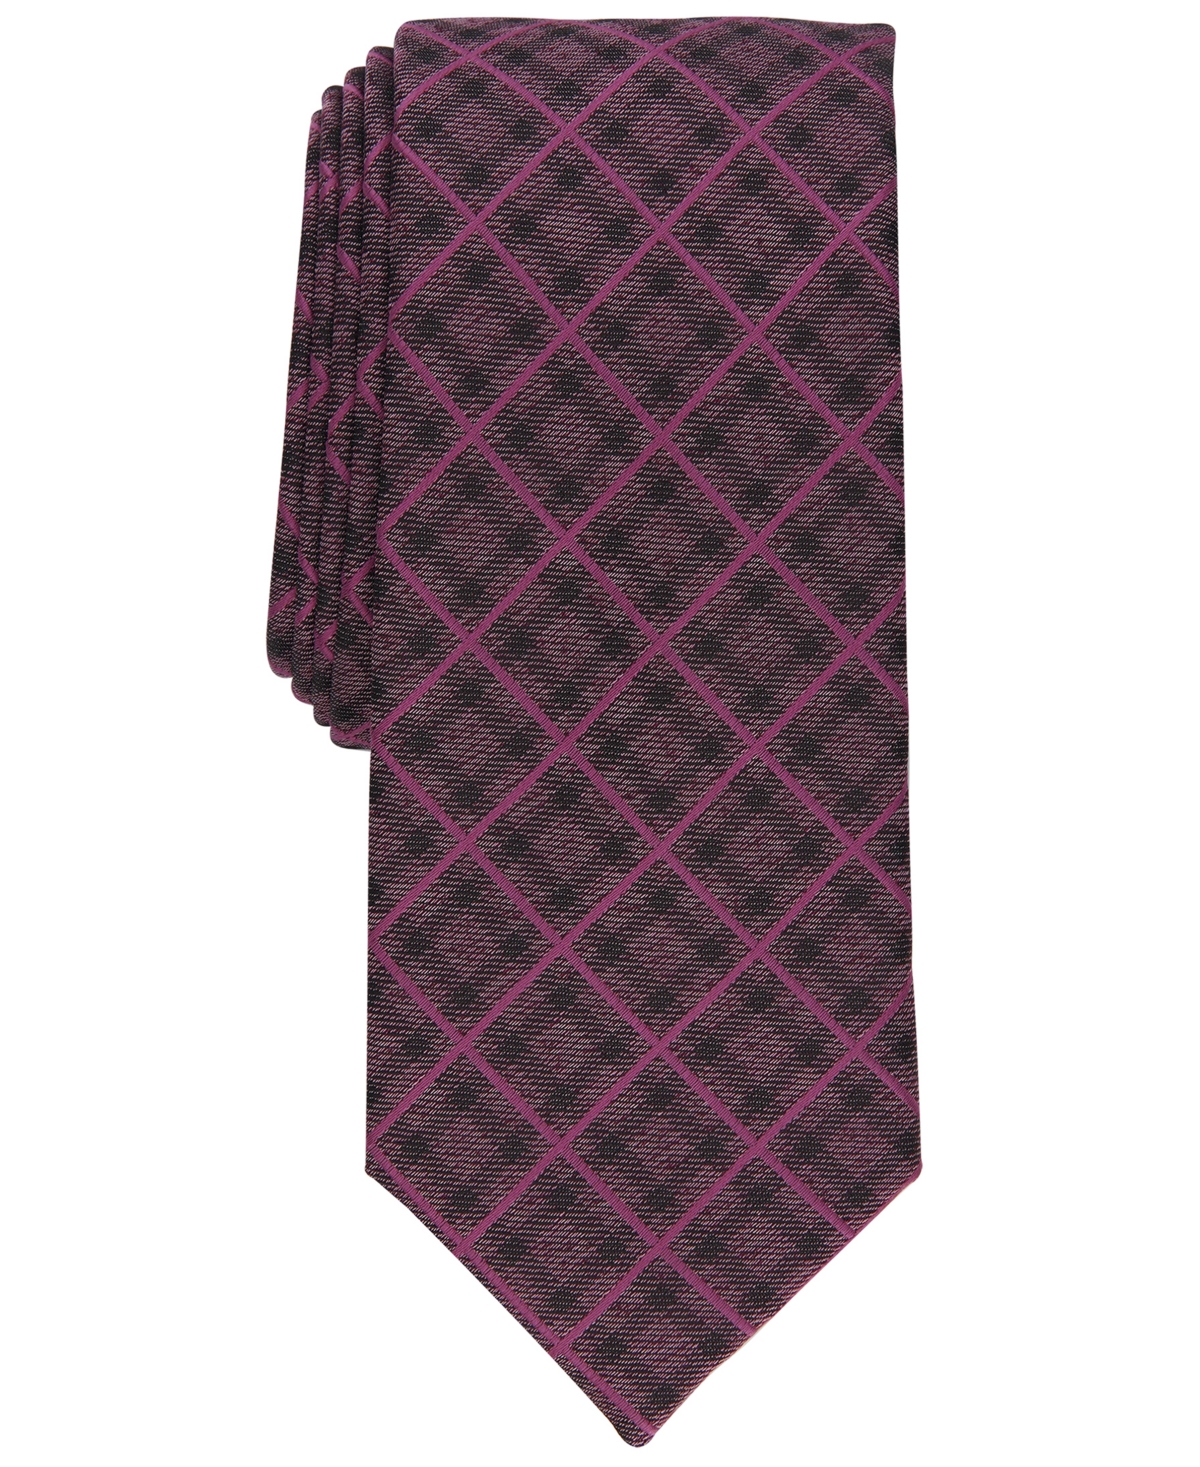 Men's Mathison Grid Slim Tie, Created for Macy's - Dusty Pink